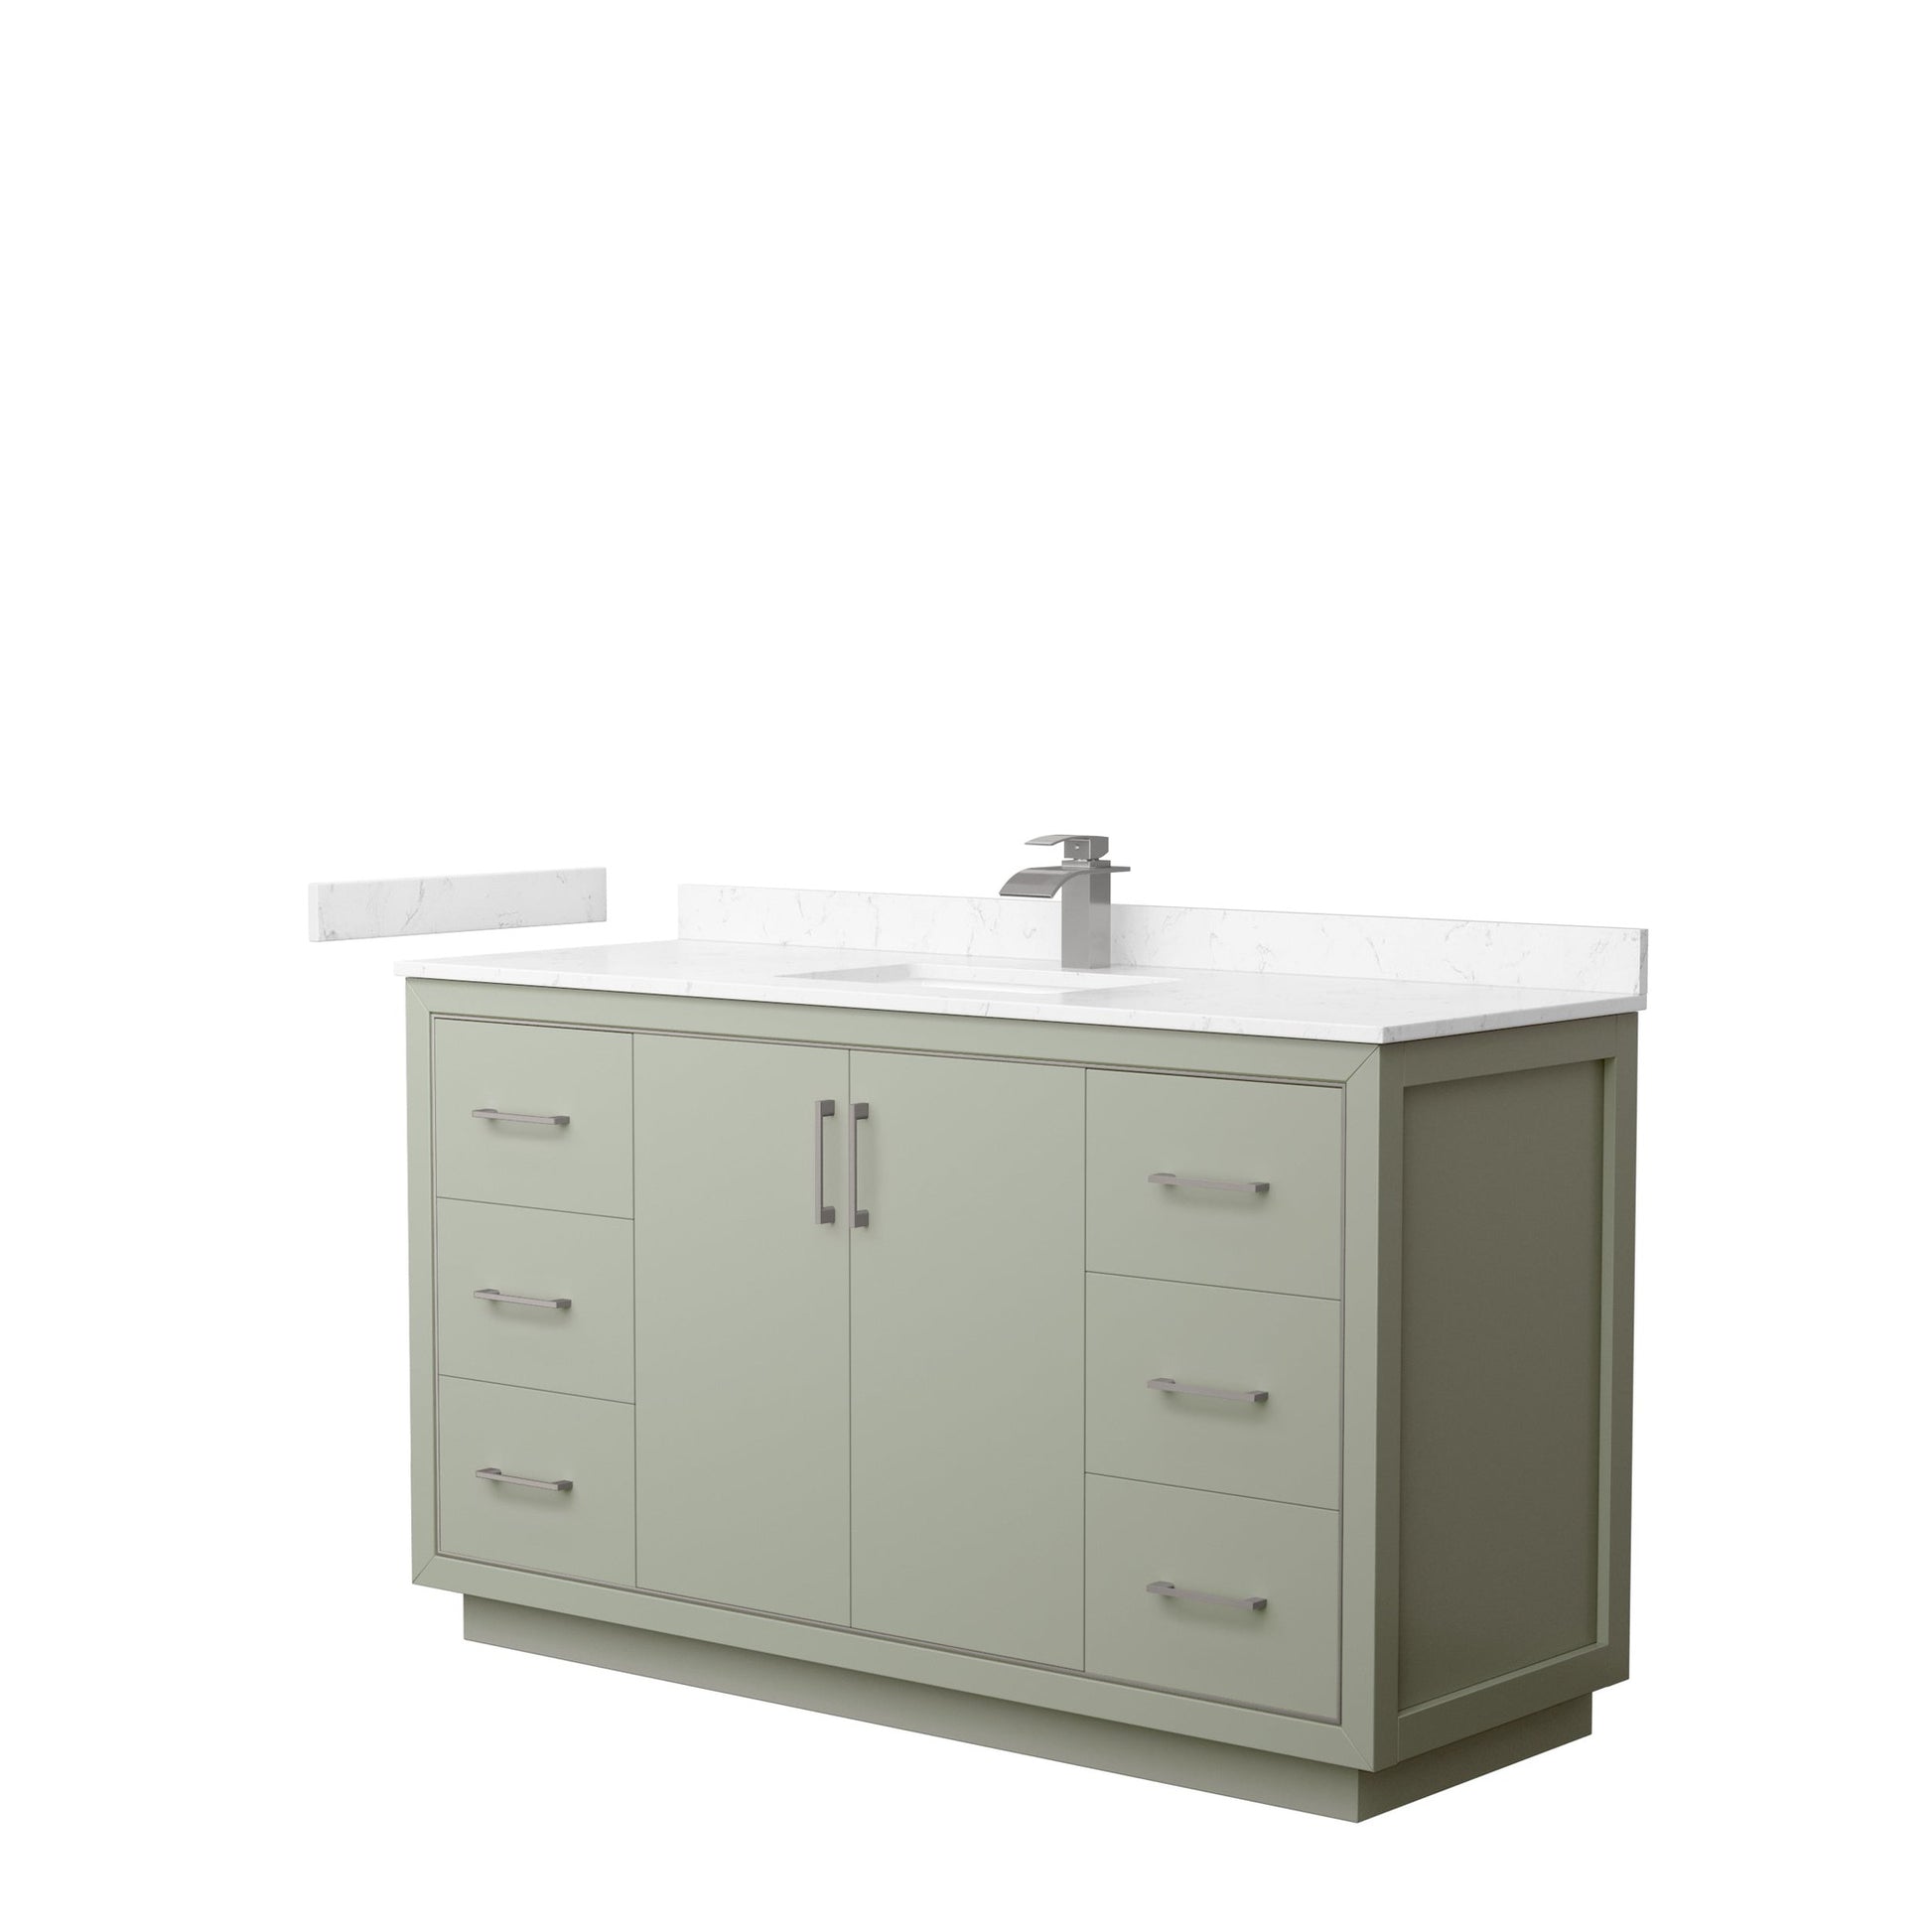 Wyndham Collection Icon 60" Single Bathroom Vanity in Light Green, Carrara Cultured Marble Countertop, Undermount Square Sink, Brushed Nickel Trim